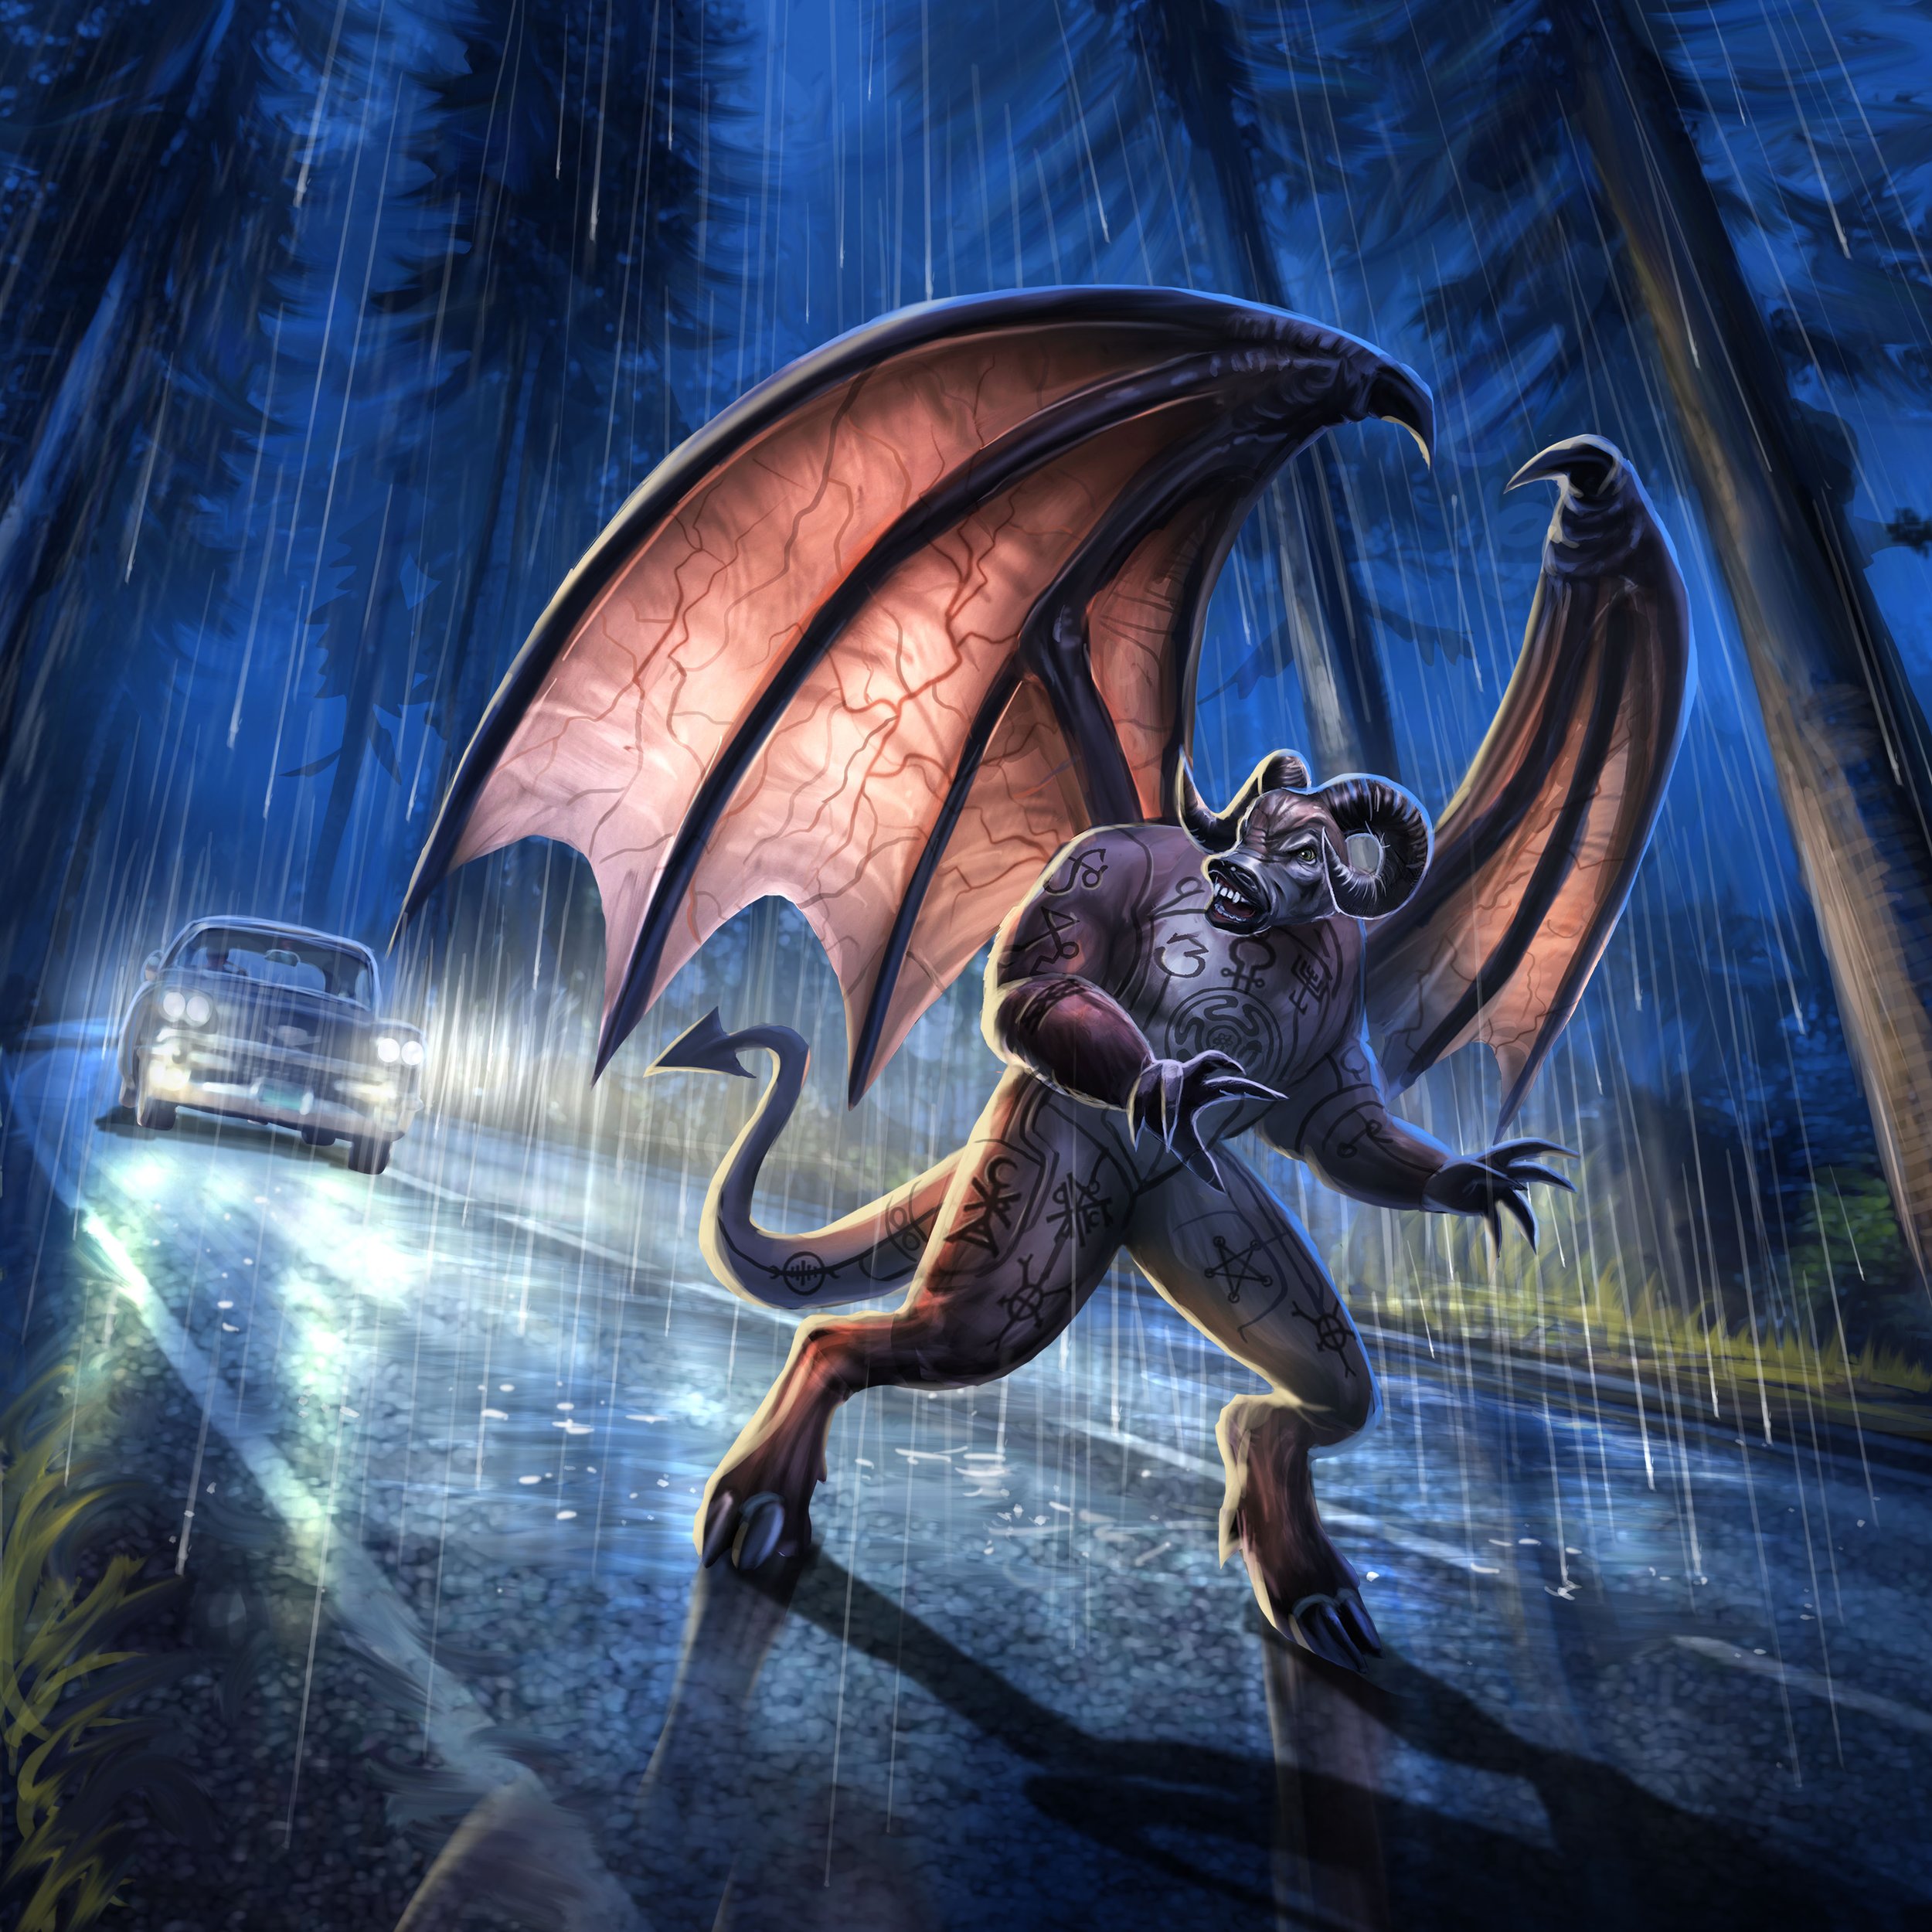 Mythical Creatures: Jersey Devil